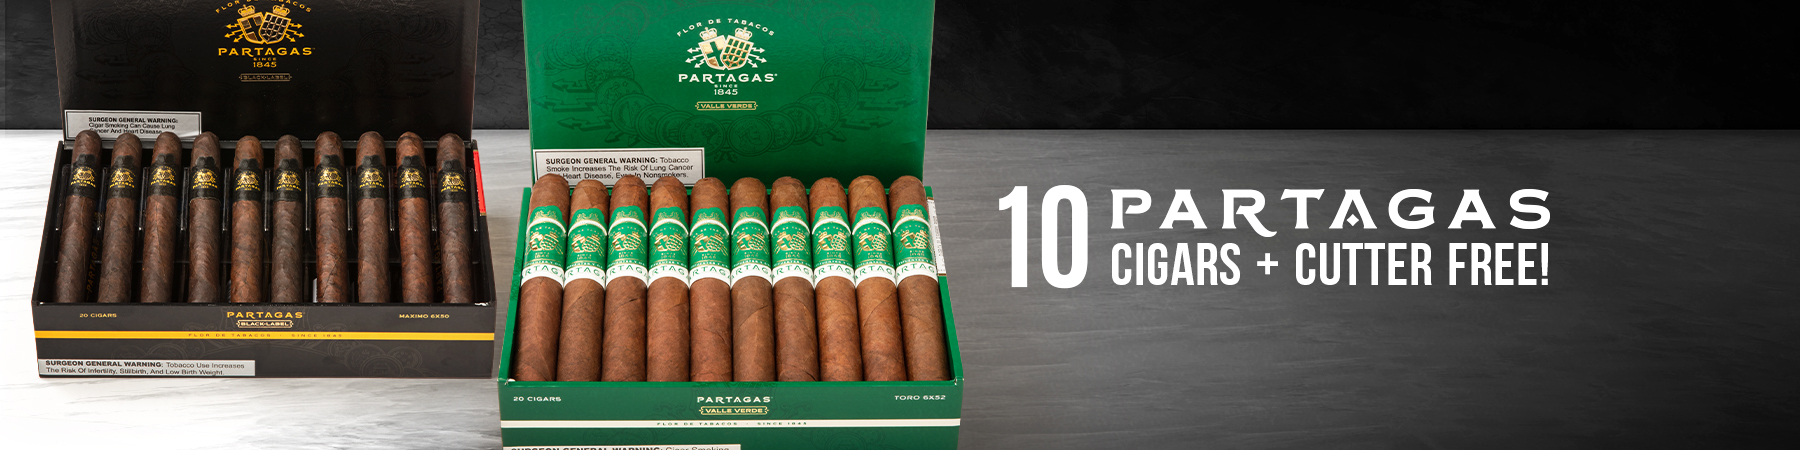 10 Cigars + Cutter Free